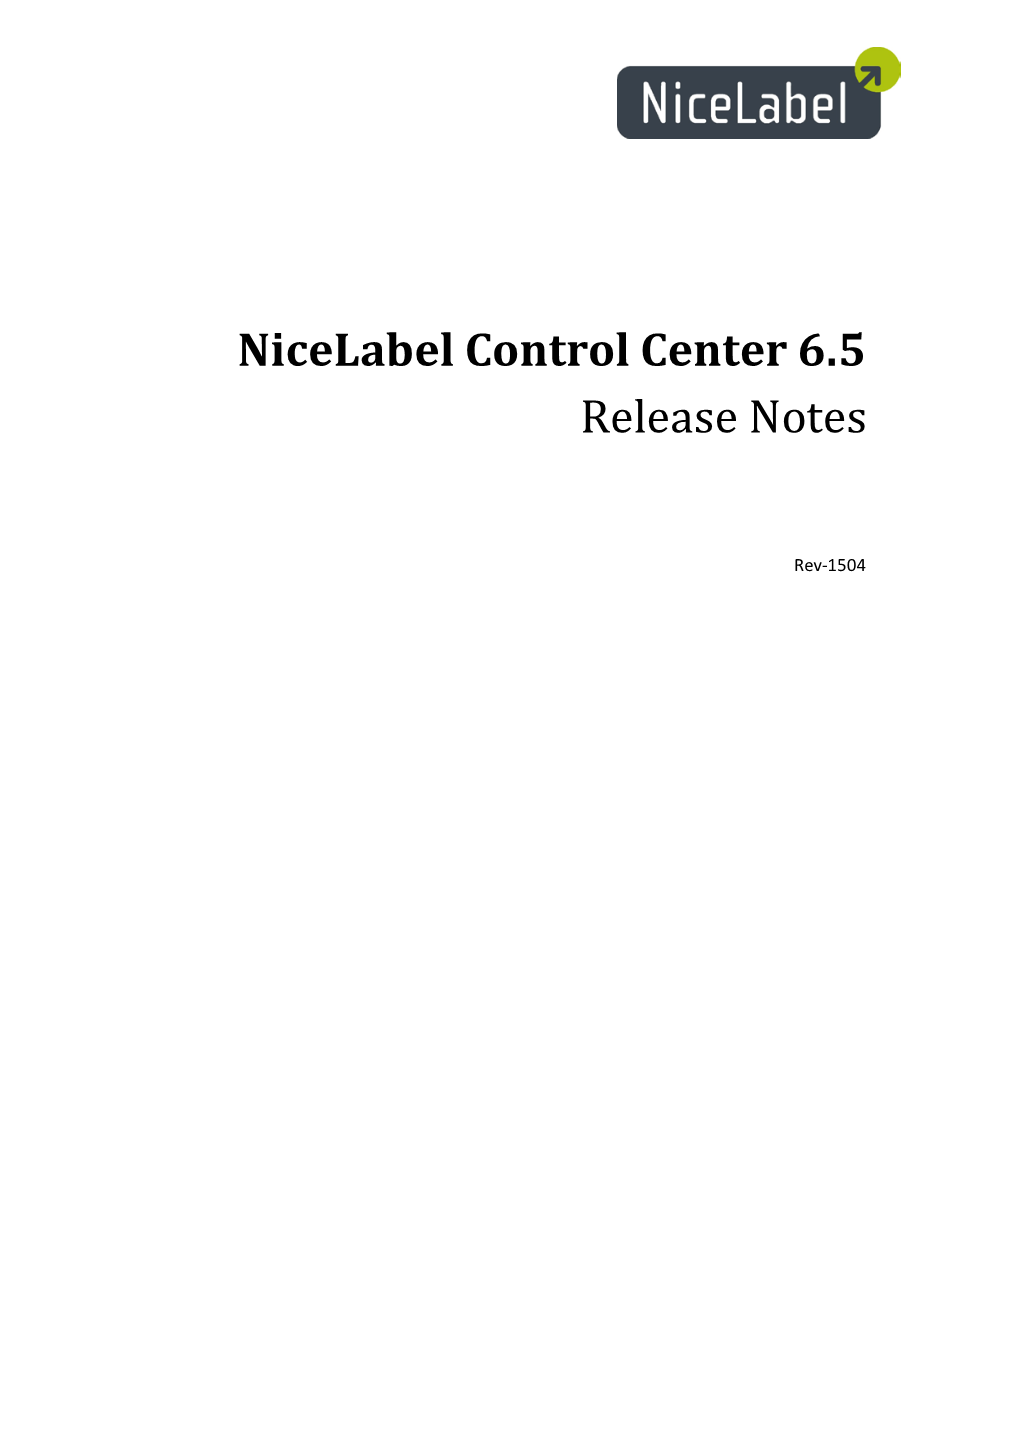 Release Notes for Nicelabel Control Center 6.5 Pg 1